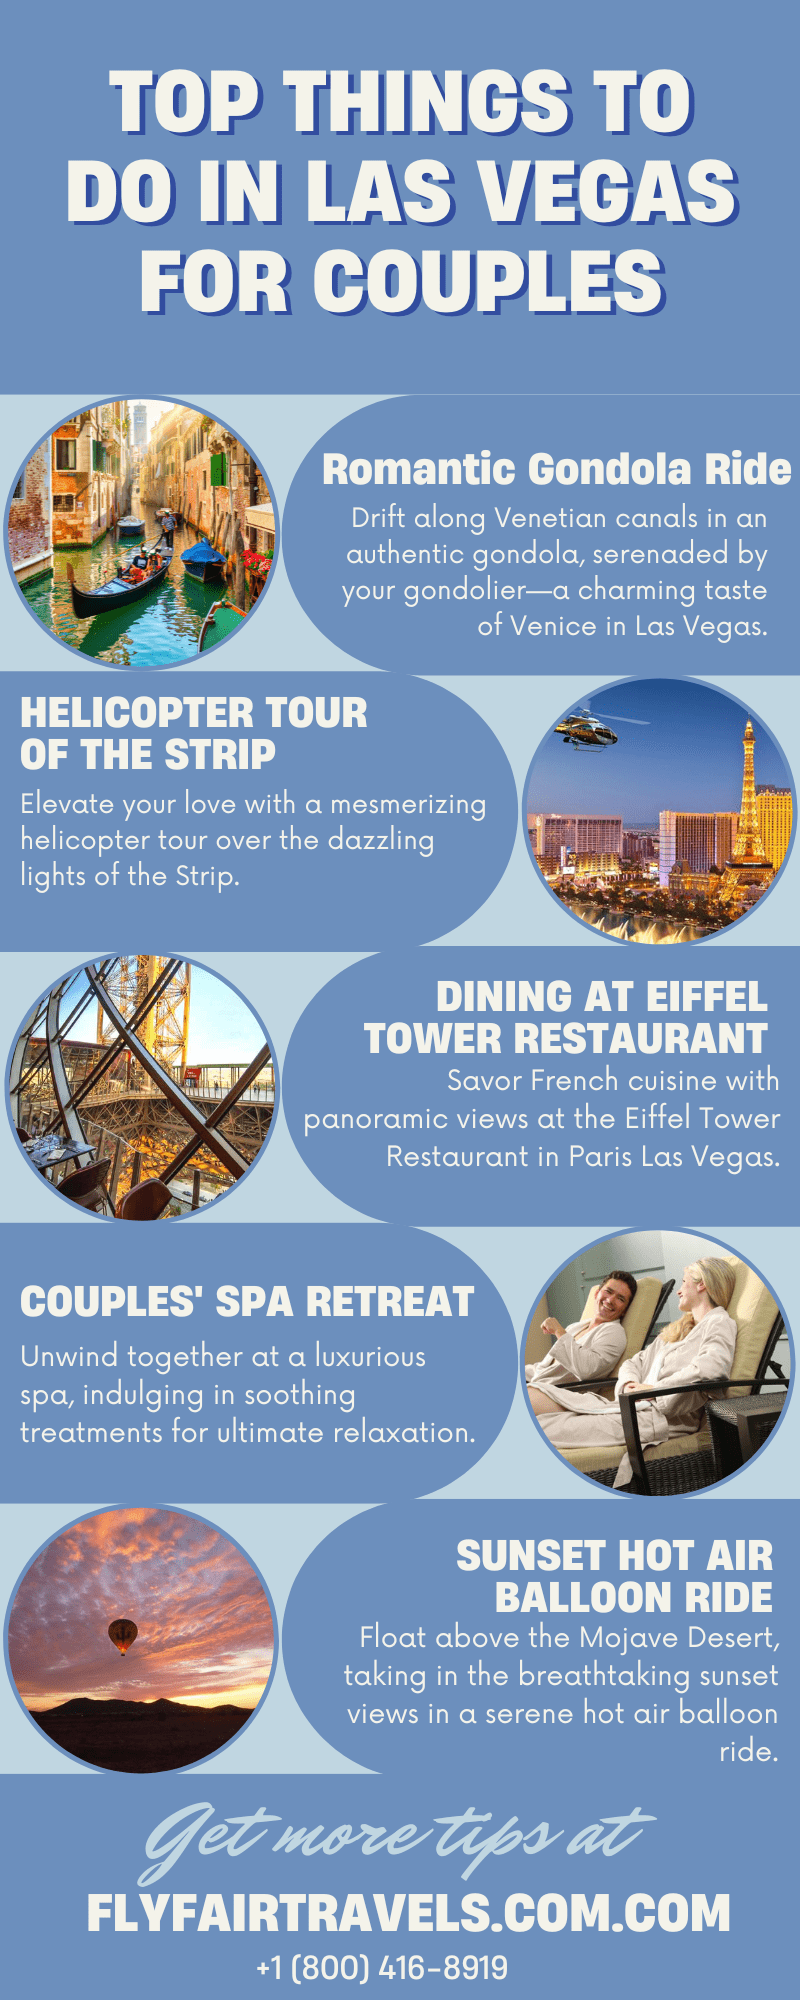 infographic_of_top_Things_to_Do_in_Las_Vegas_Nevada_for_Couples